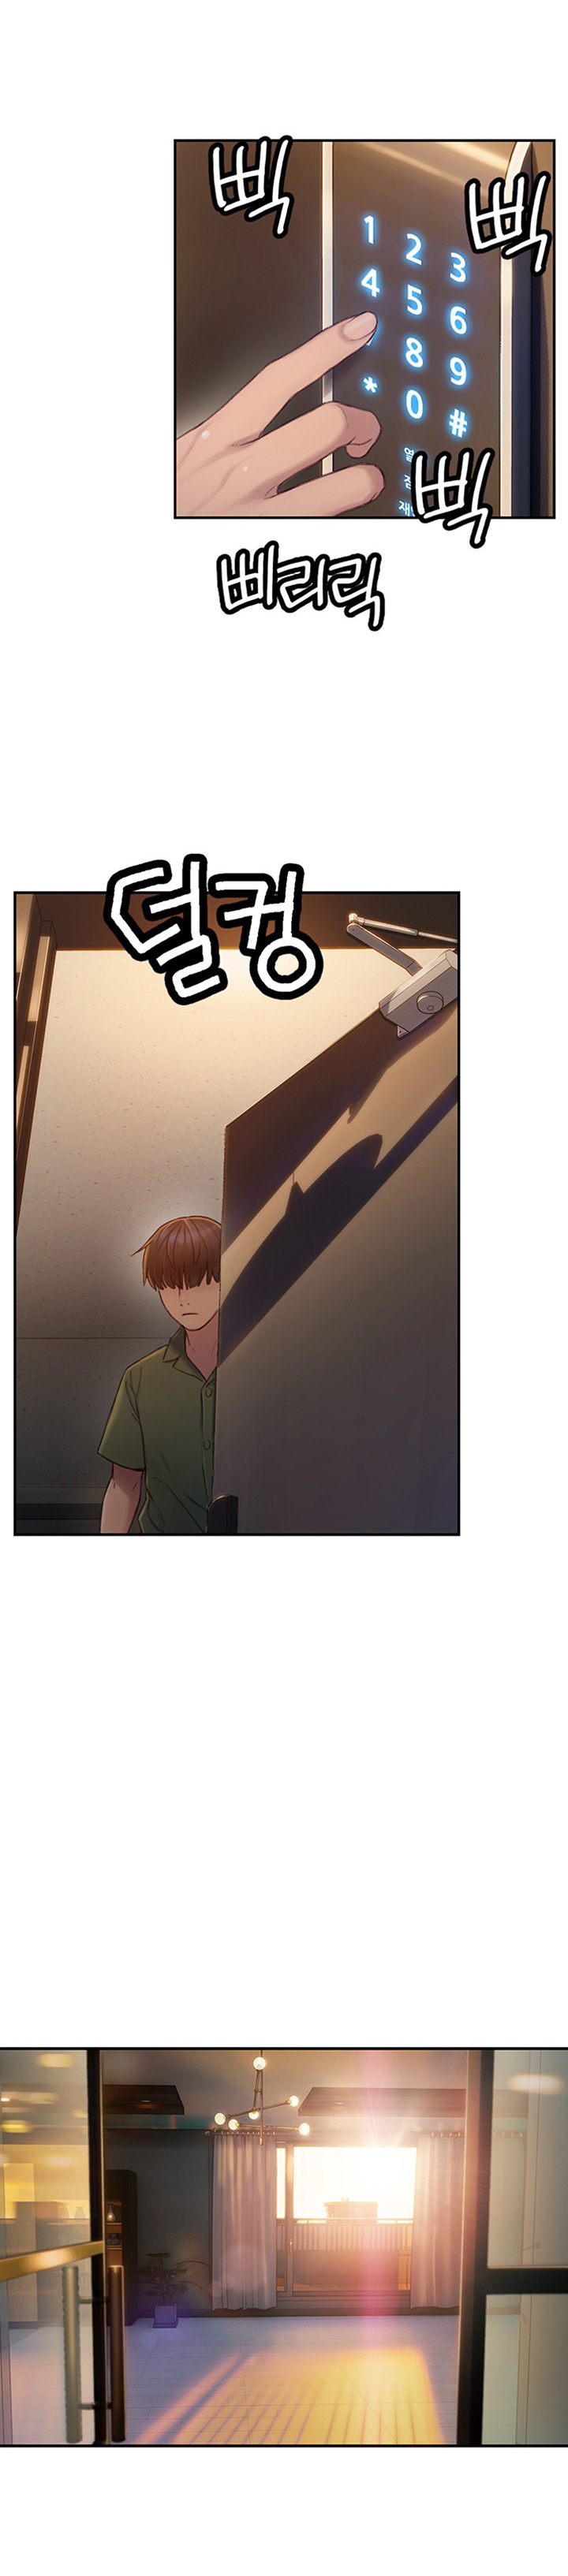 [Park Hyeongjun] Love Limit Exceeded (01-28) Ongoing - Page 14